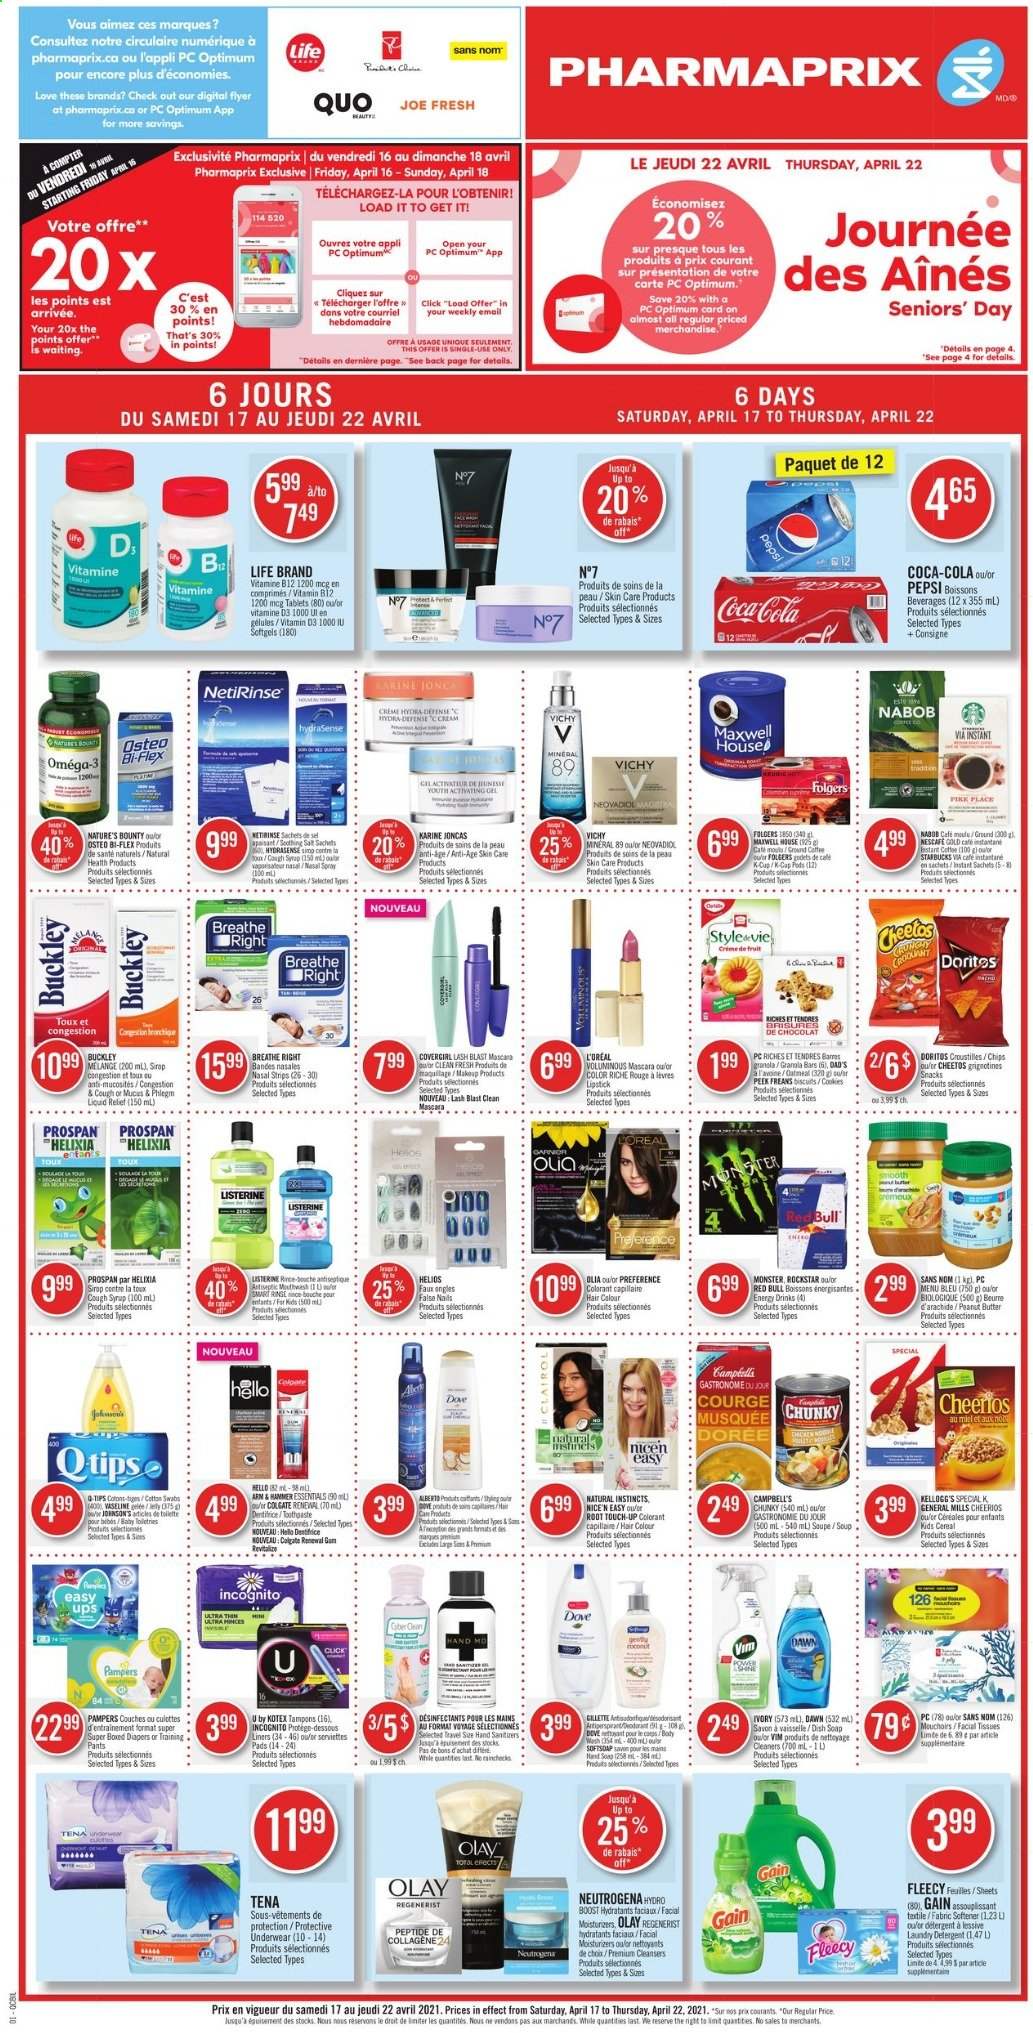 thumbnail - Pharmaprix Flyer - April 17, 2021 - April 22, 2021 - Sales products - Campbell's, soup, cookies, snack, Kellogg's, biscuit, Doritos, Cheetos, Cheerios, peanut butter, syrup, Coca-Cola, Pepsi, energy drink, Monster, Red Bull, Rockstar, Boost, Maxwell House, Folgers, coffee capsules, Starbucks, K-Cups, pants, nappies, Johnson's, tissues, Gain, fabric softener, laundry detergent, body wash, Vichy, Vaseline, Kotex, tampons, facial tissues, L’Oréal, moisturizer, Olay, Root Touch-Up, hair color, lipstick, makeup, Nature's Bounty, Omega-3, Bi-Flex, vitamin D3, nasal spray, Gillette, Listerine, mascara, Neutrogena, Pampers, chips, Nescafé. Page 1.